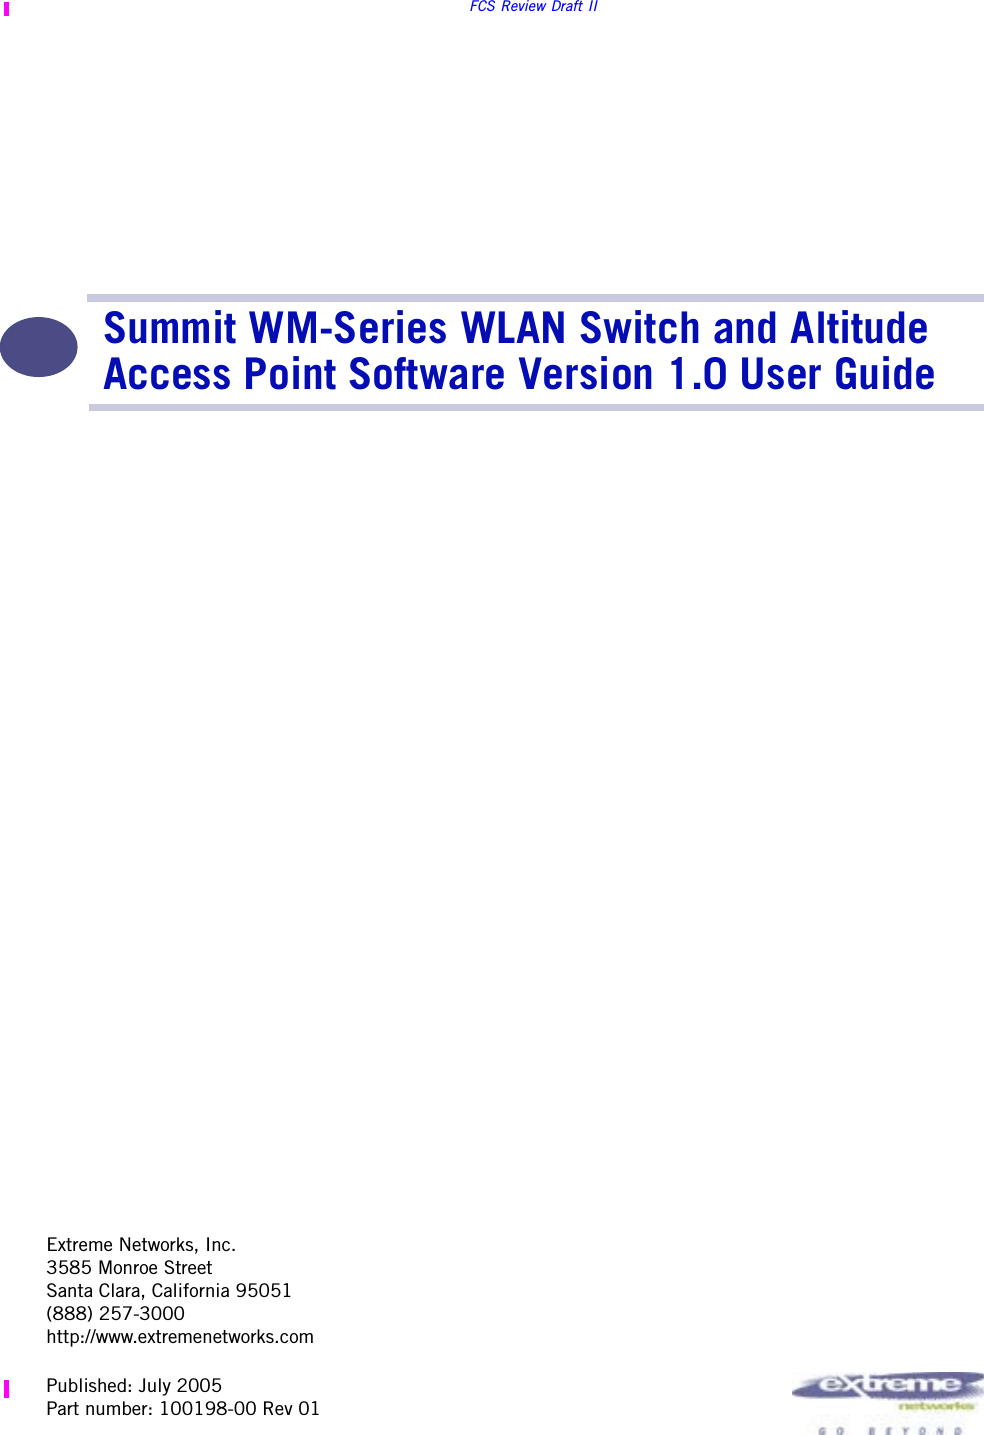 Extreme Networks, Inc.3585 Monroe StreetSanta Clara, California 95051(888) 257-3000http://www.extremenetworks.comFCS Review Draft IISummit WM-Series WLAN Switch and Altitude Access Point Software Version 1.0 User GuidePublished: July 2005Part number: 100198-00 Rev 01